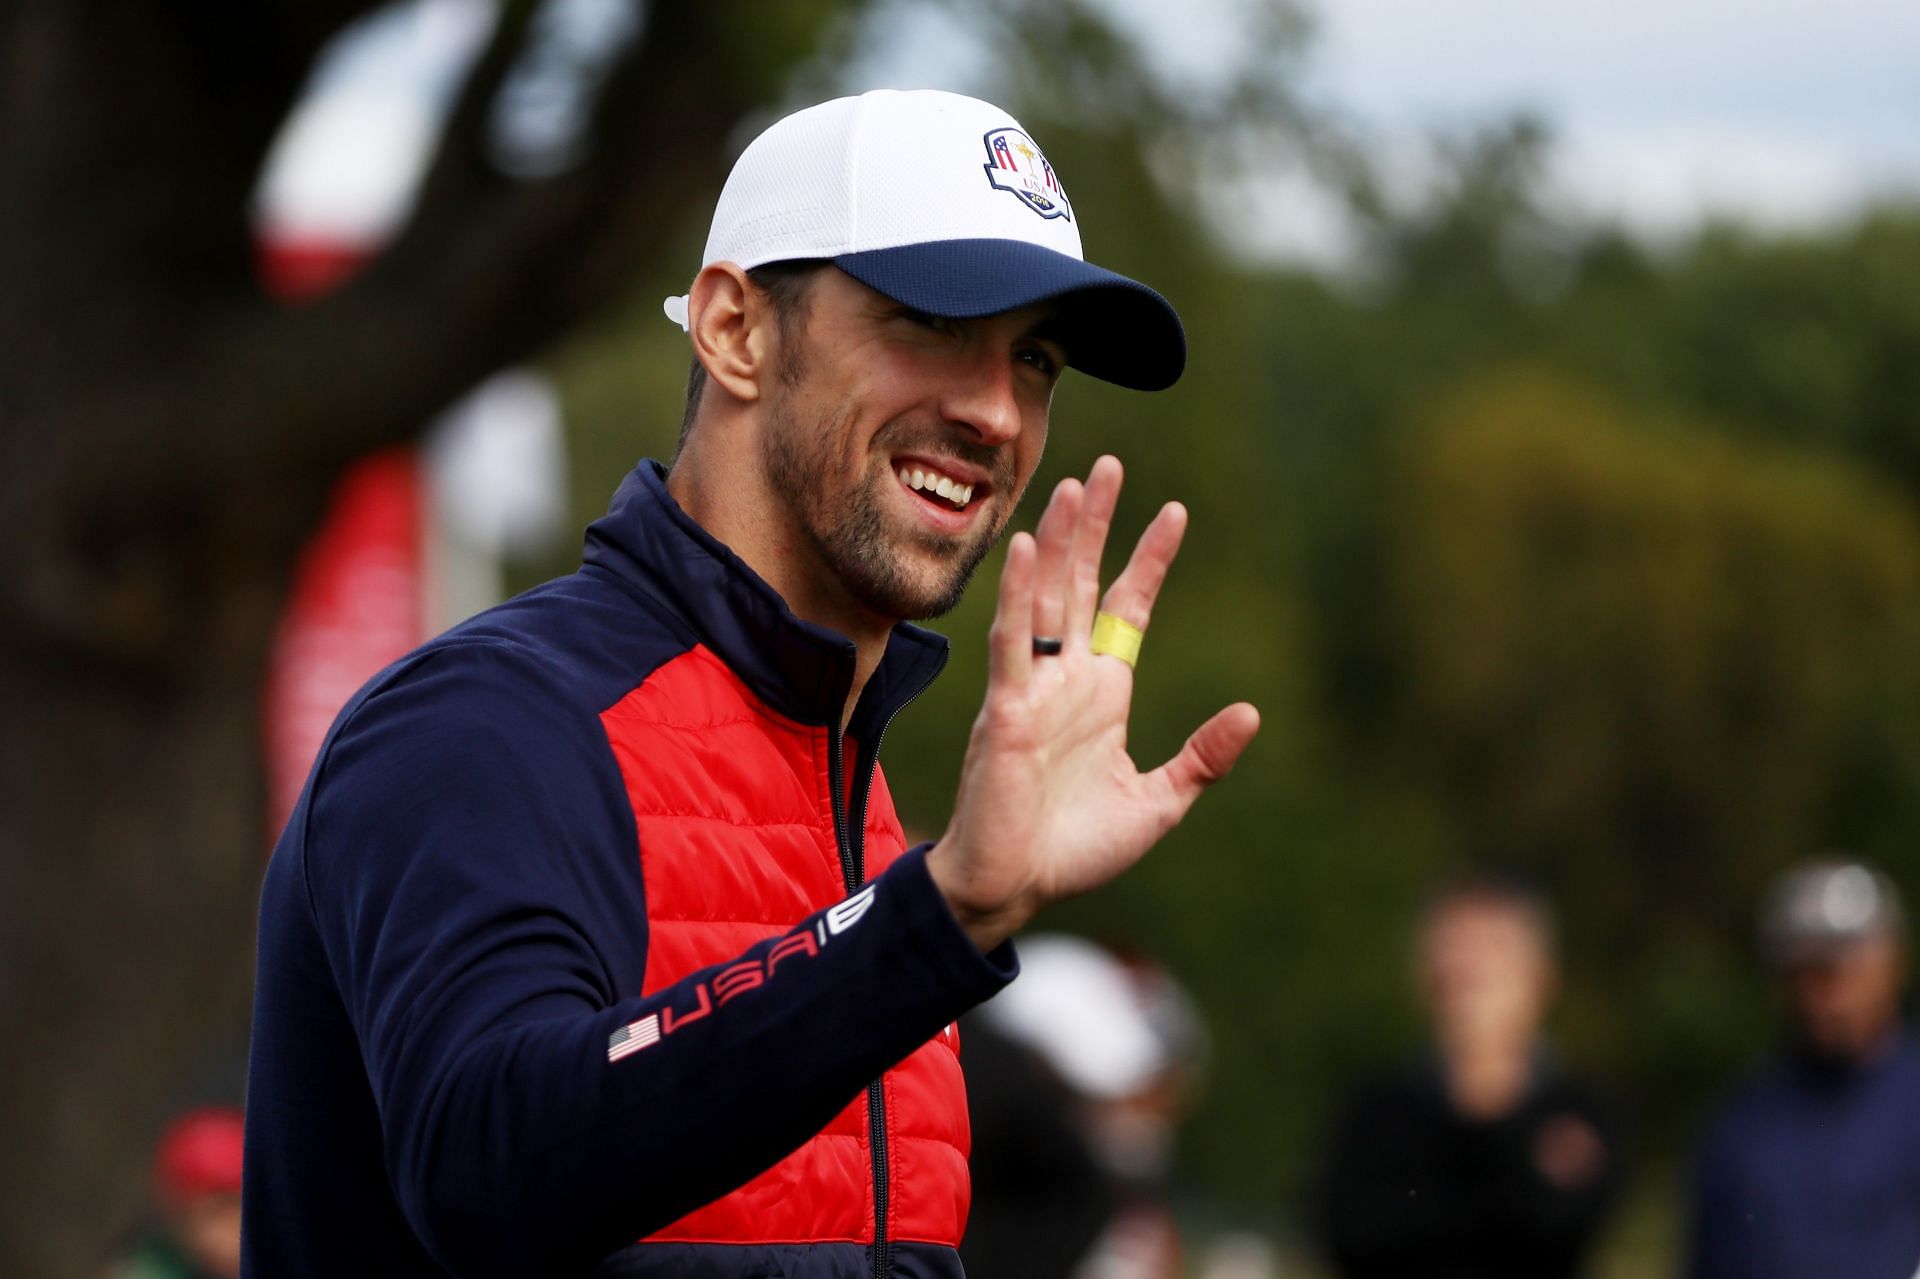 2016 Ryder Cup - Celebrity Matches